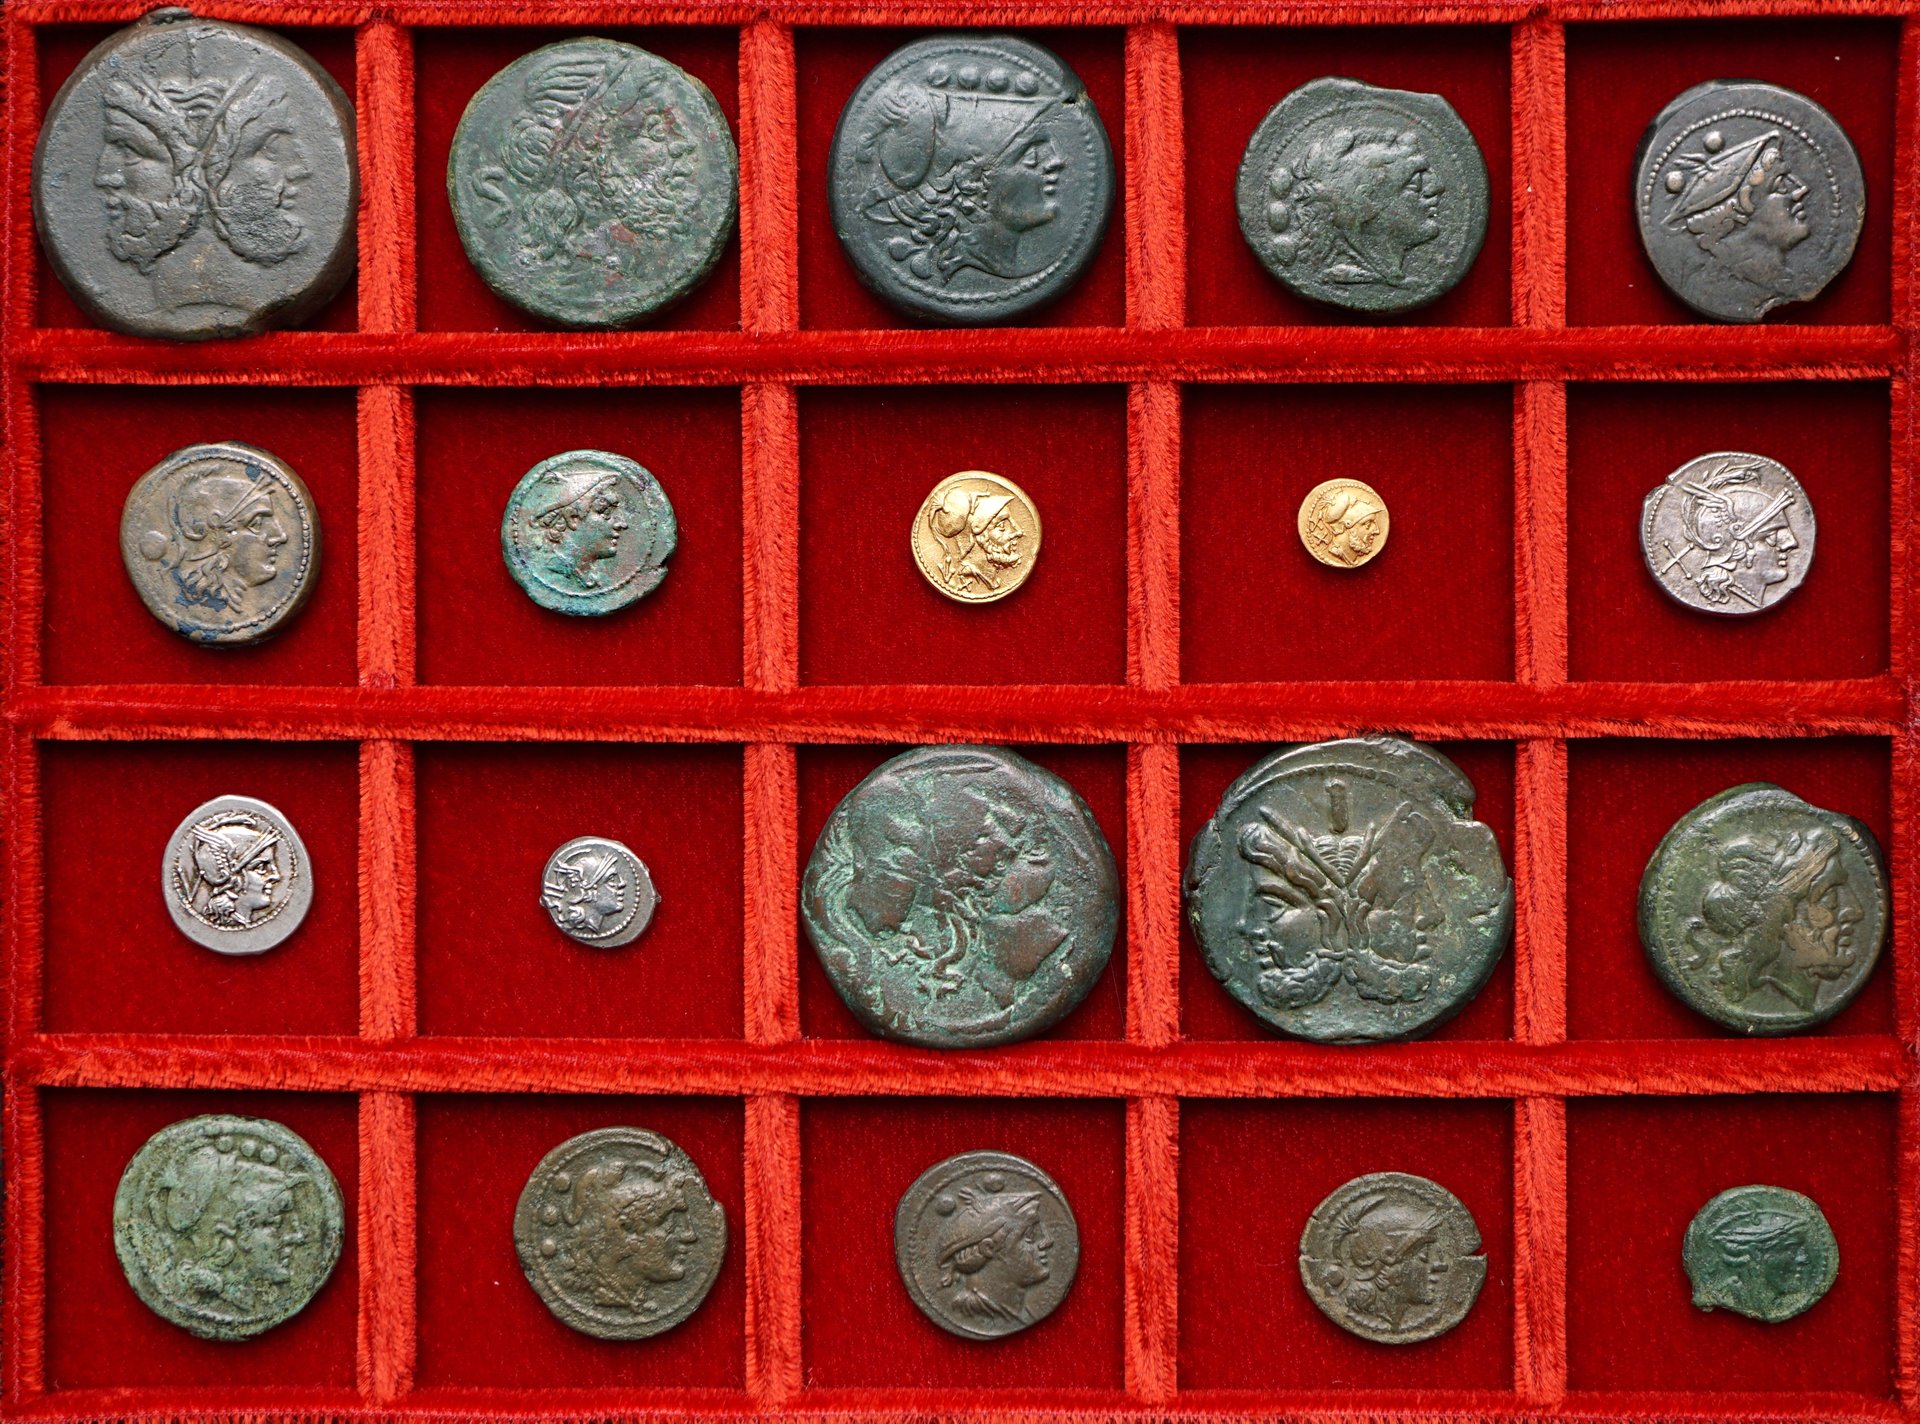 early denarius coinage in gold and silver with related postsemilibral and sextantal bronzes (2).JPG